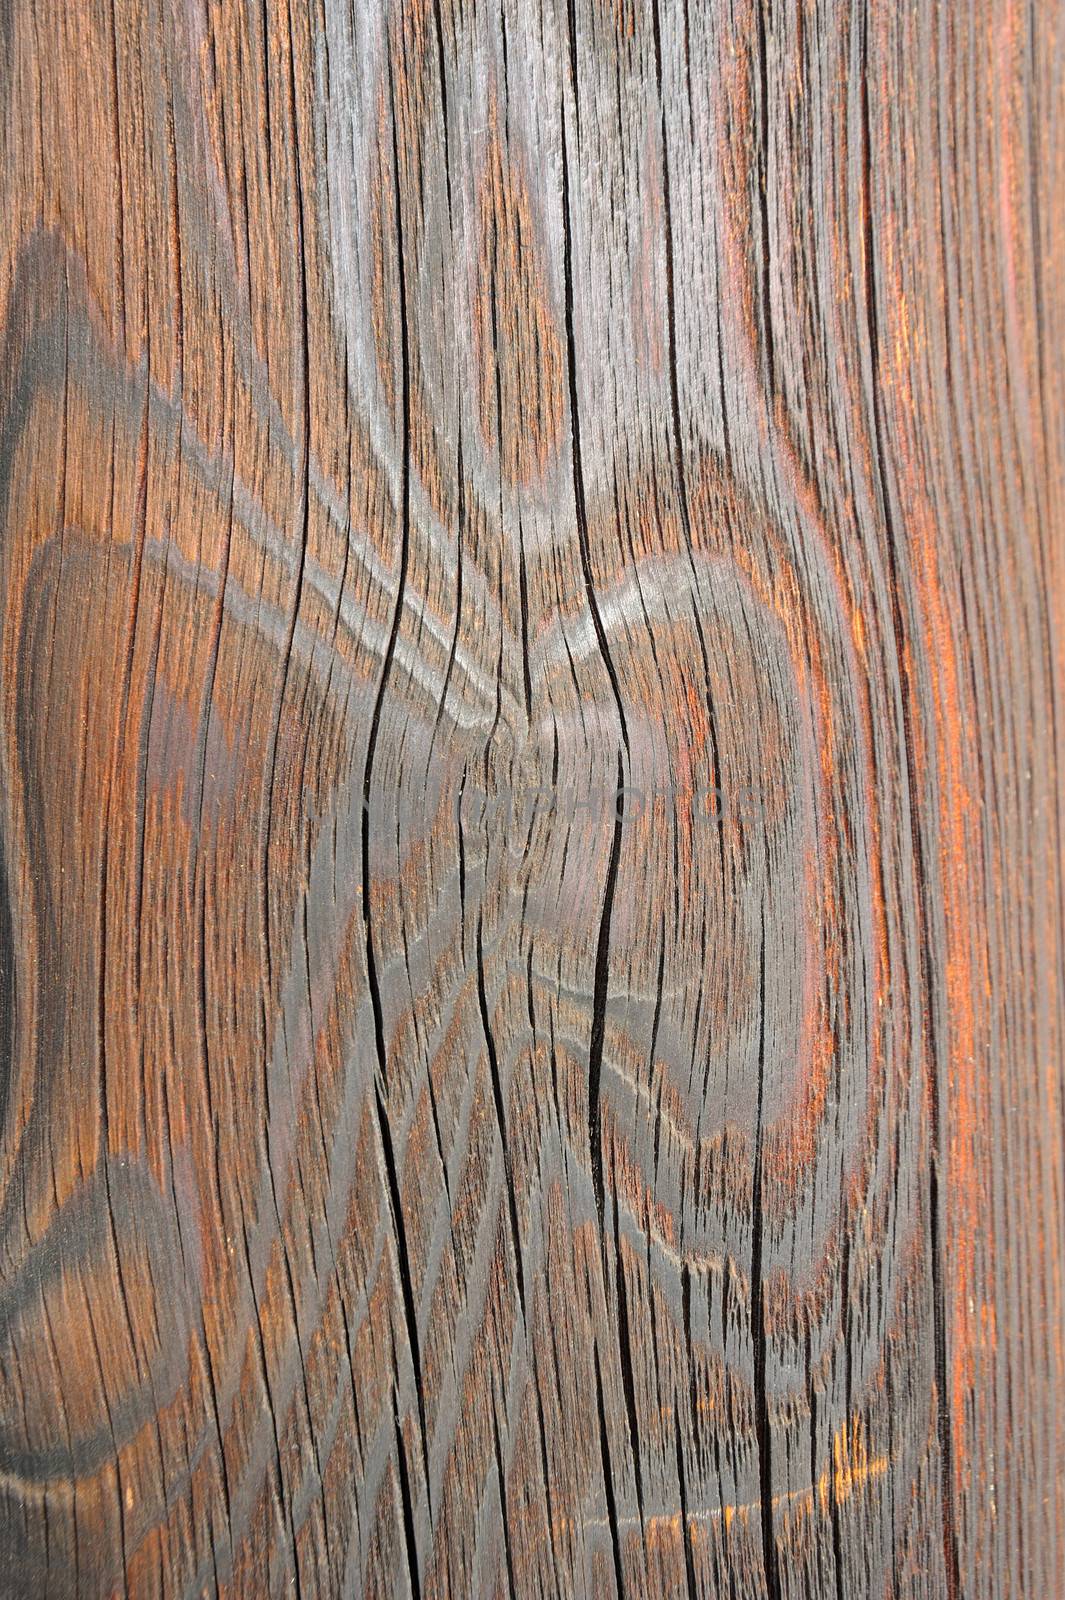 Closeup Wooden Texture by letoakin